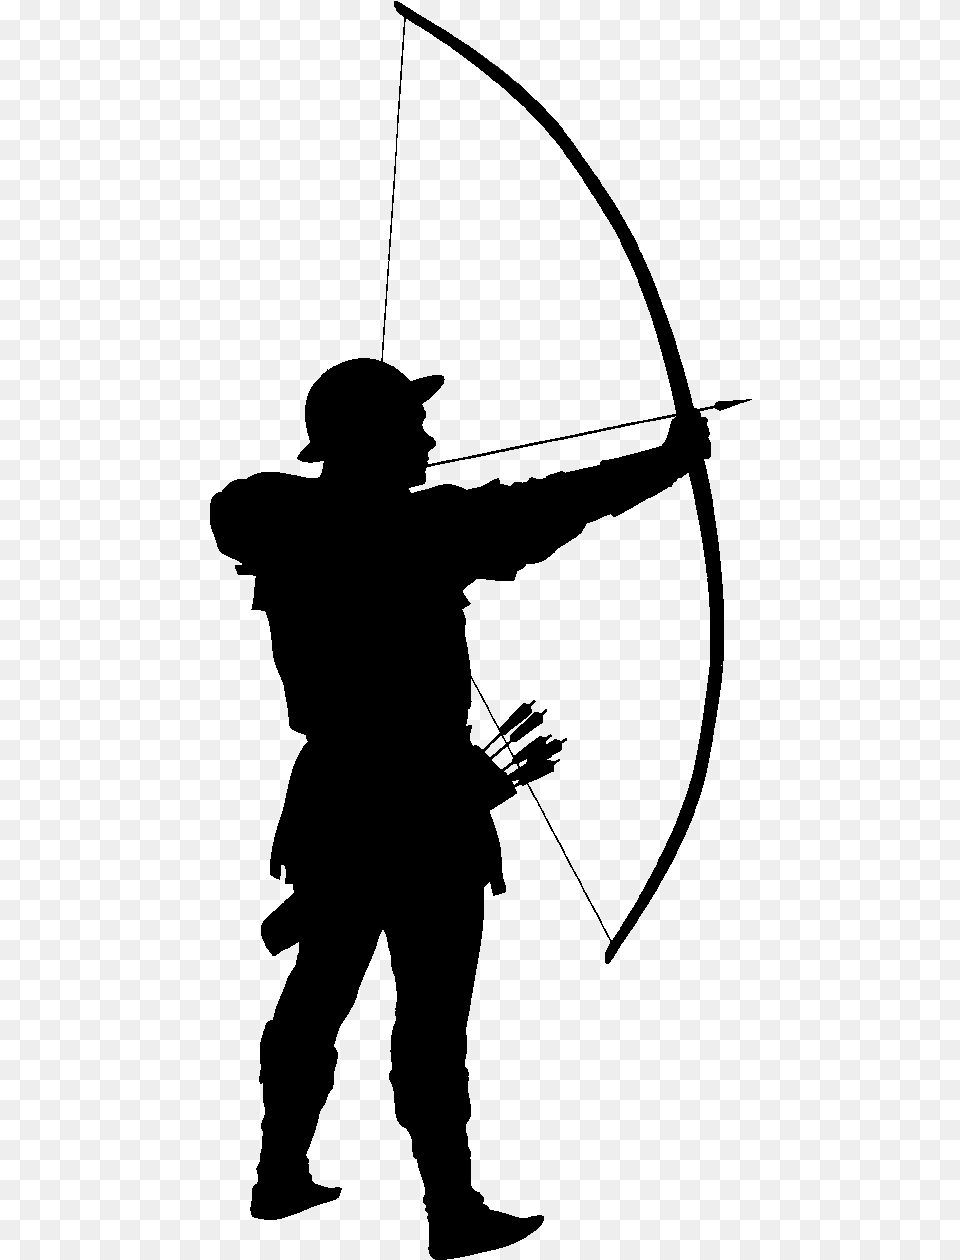 Archer Silhouette Silhouette Archery, Nature, Night, Outdoors, Astronomy Free Transparent Png